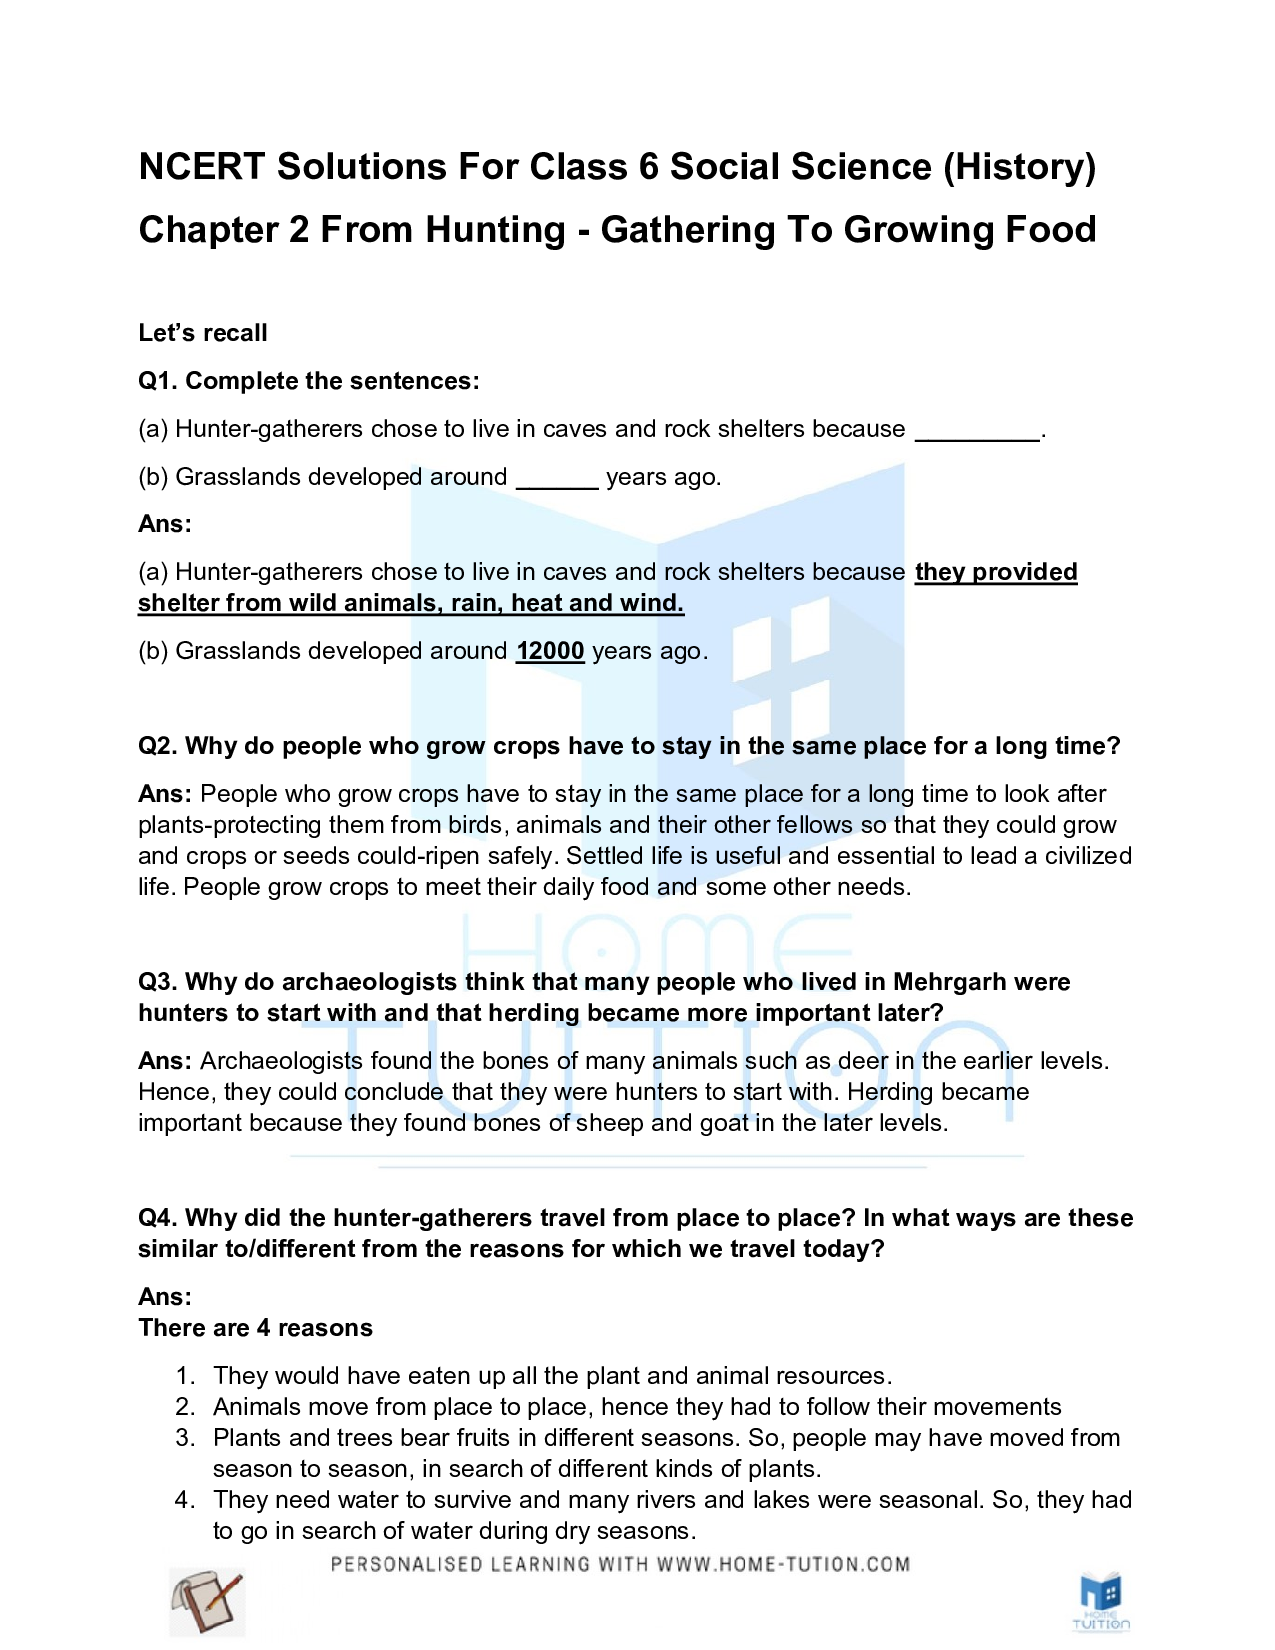 Chapter 2 From Hunting – Gathering to Growing Food